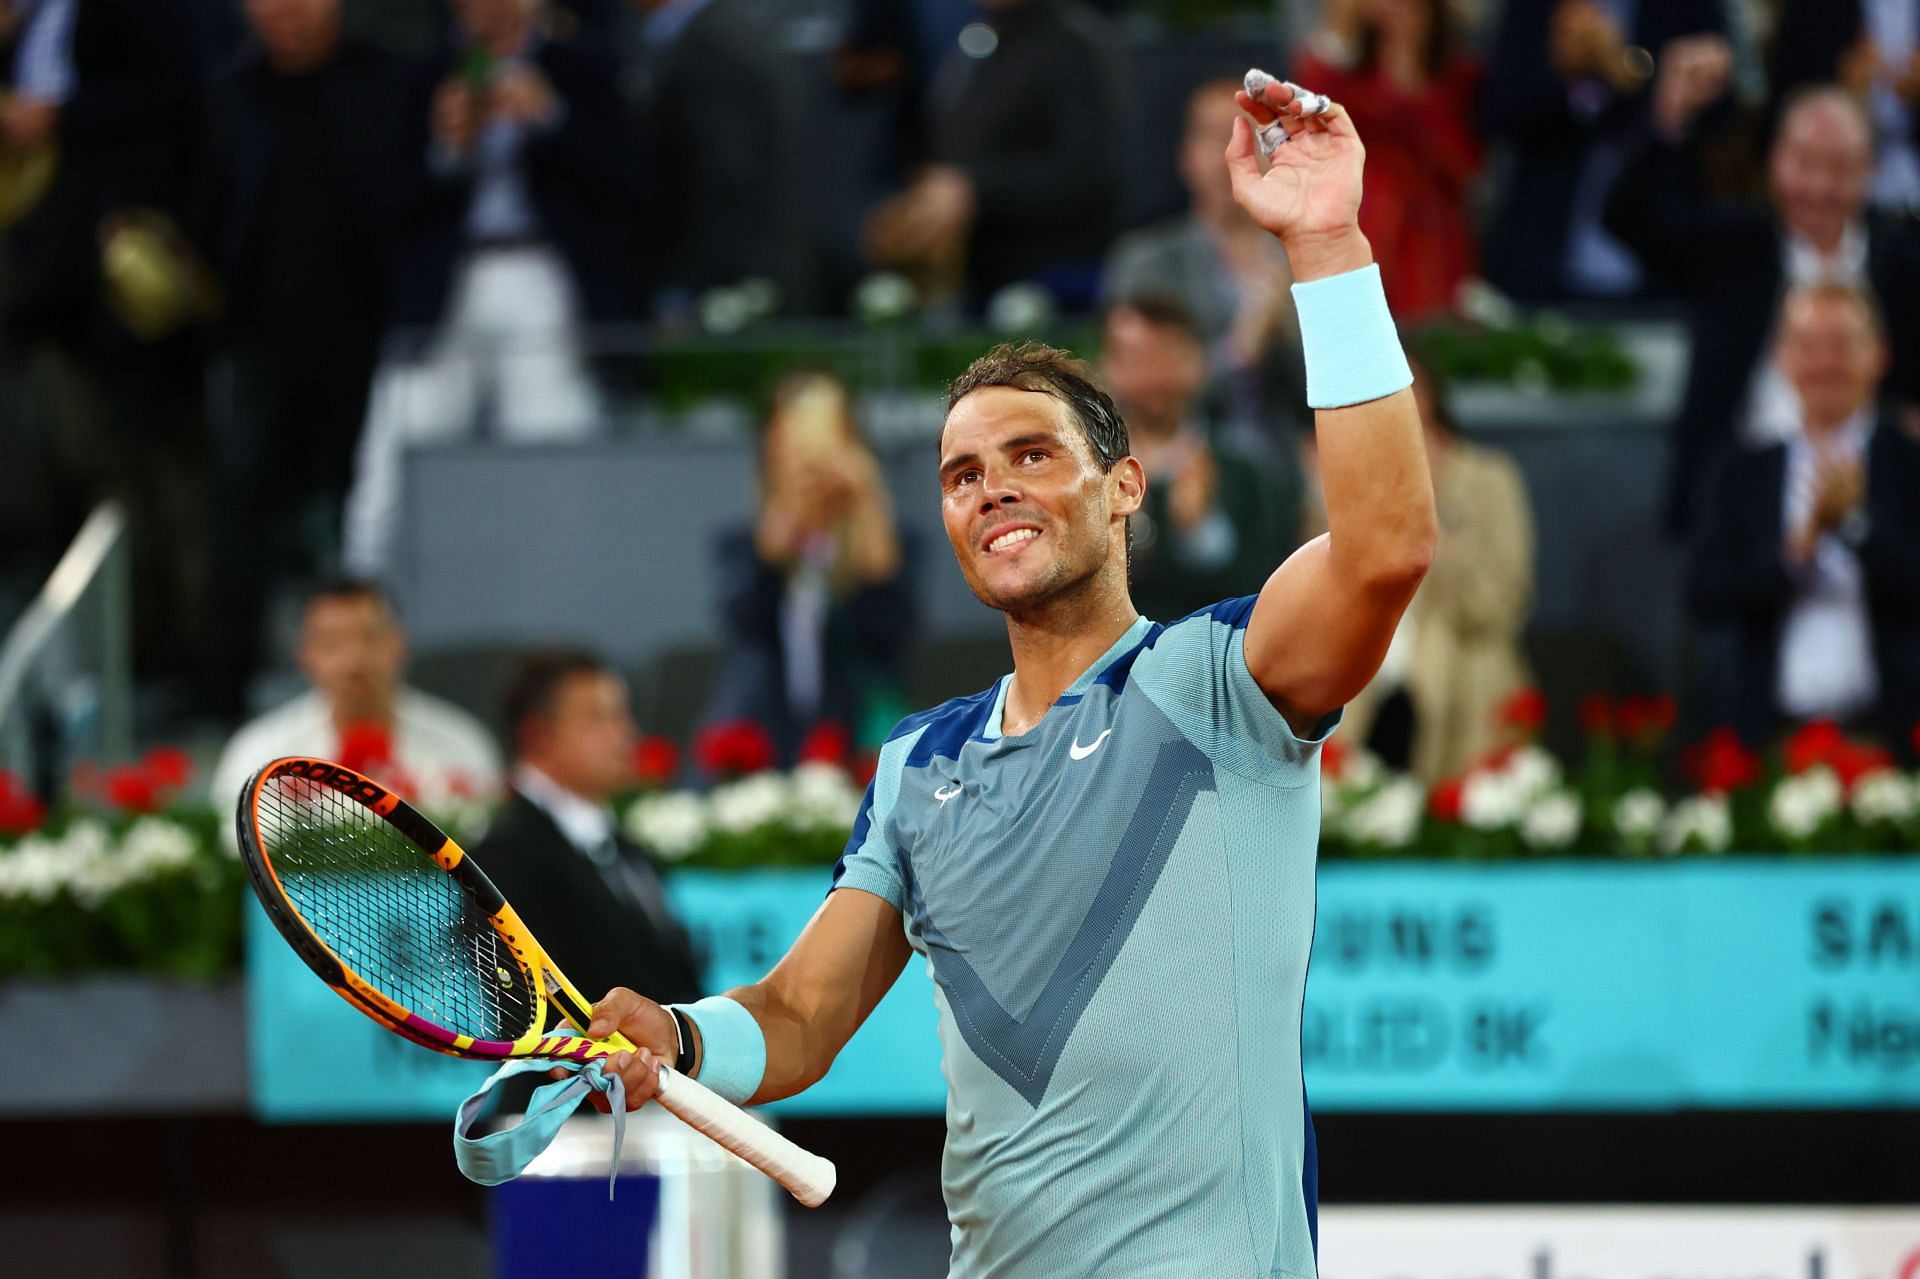 Rafael Nadal will look to get another dominant win in Madrid